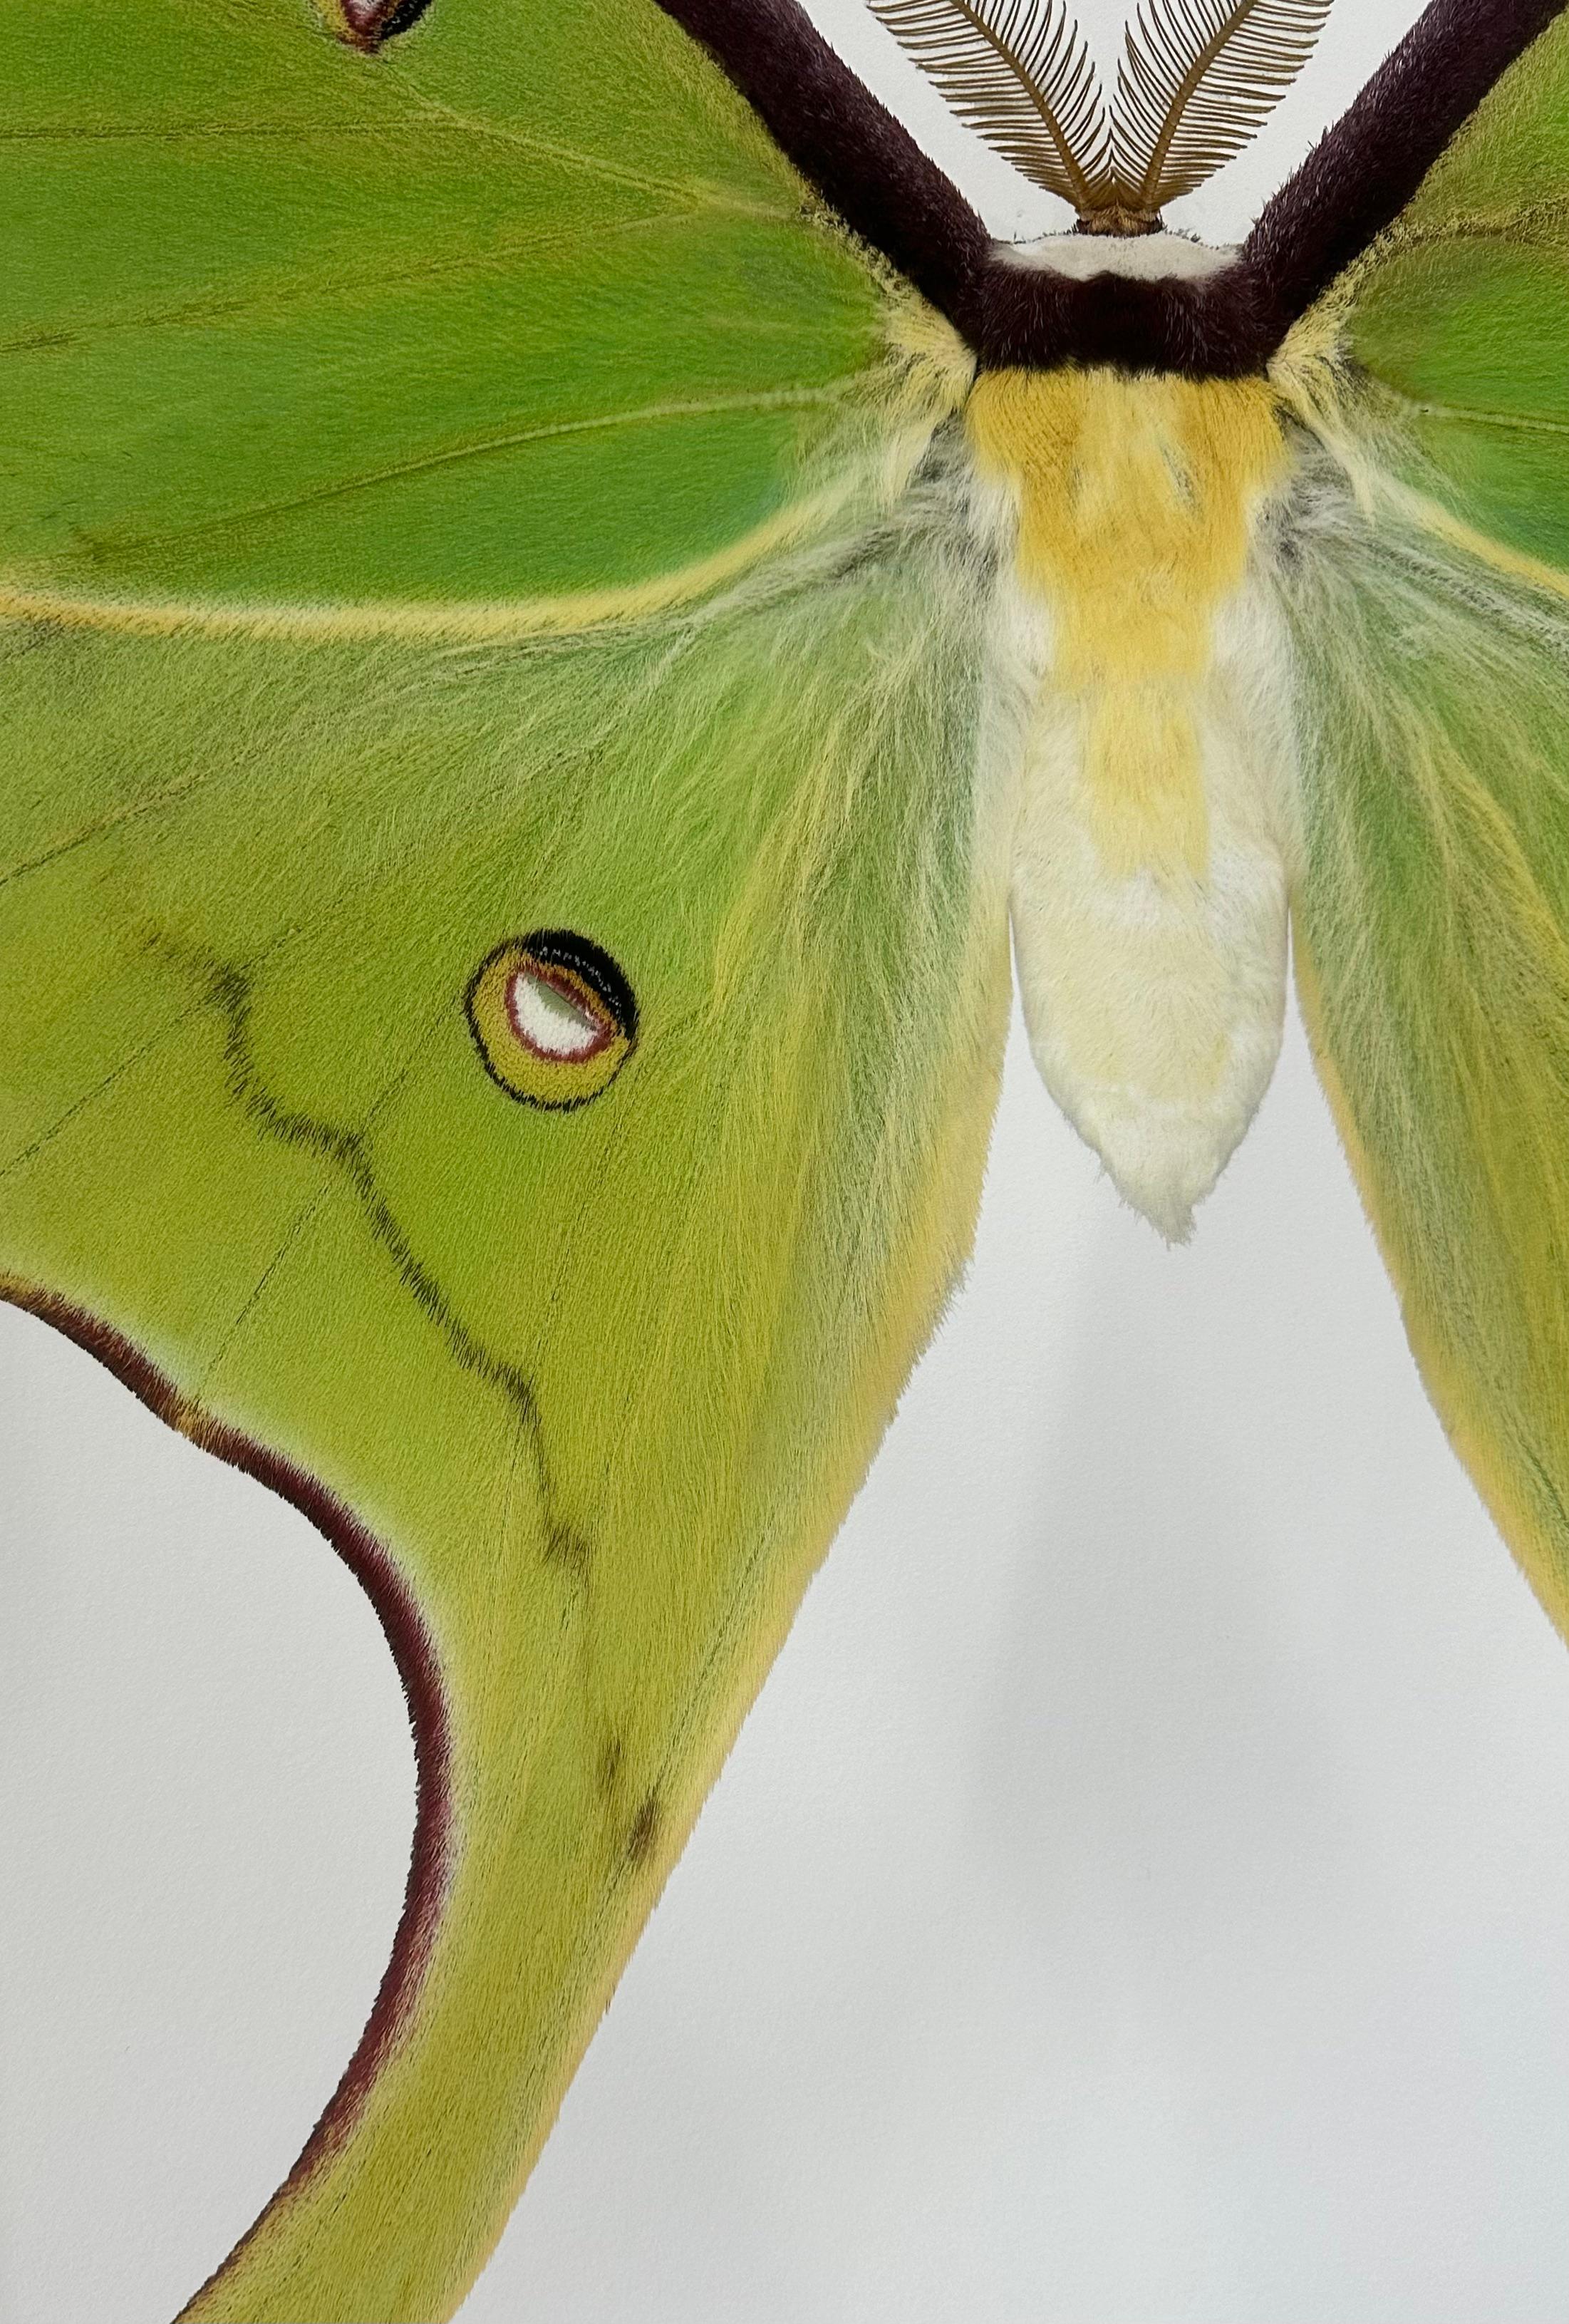 Actias Luna, Green, Yellow, Brown Moth Insect Nature Photograph For Sale 5